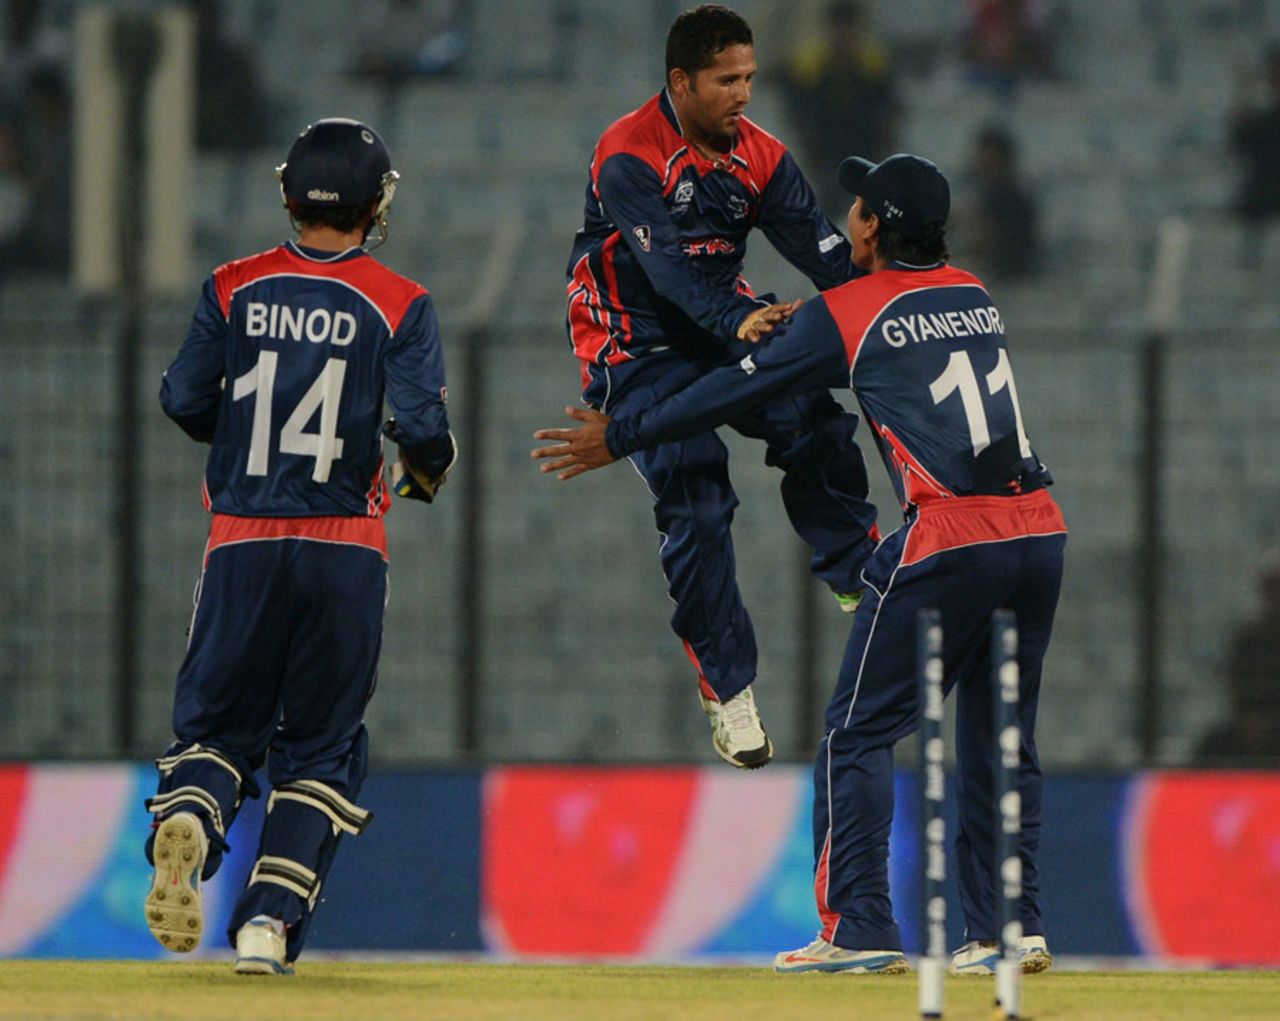 Basat Regmi took two wickets in two balls, Hong Kong v Nepal, World T20, Qualifying Group A, Chittagong, March 16, 2014 